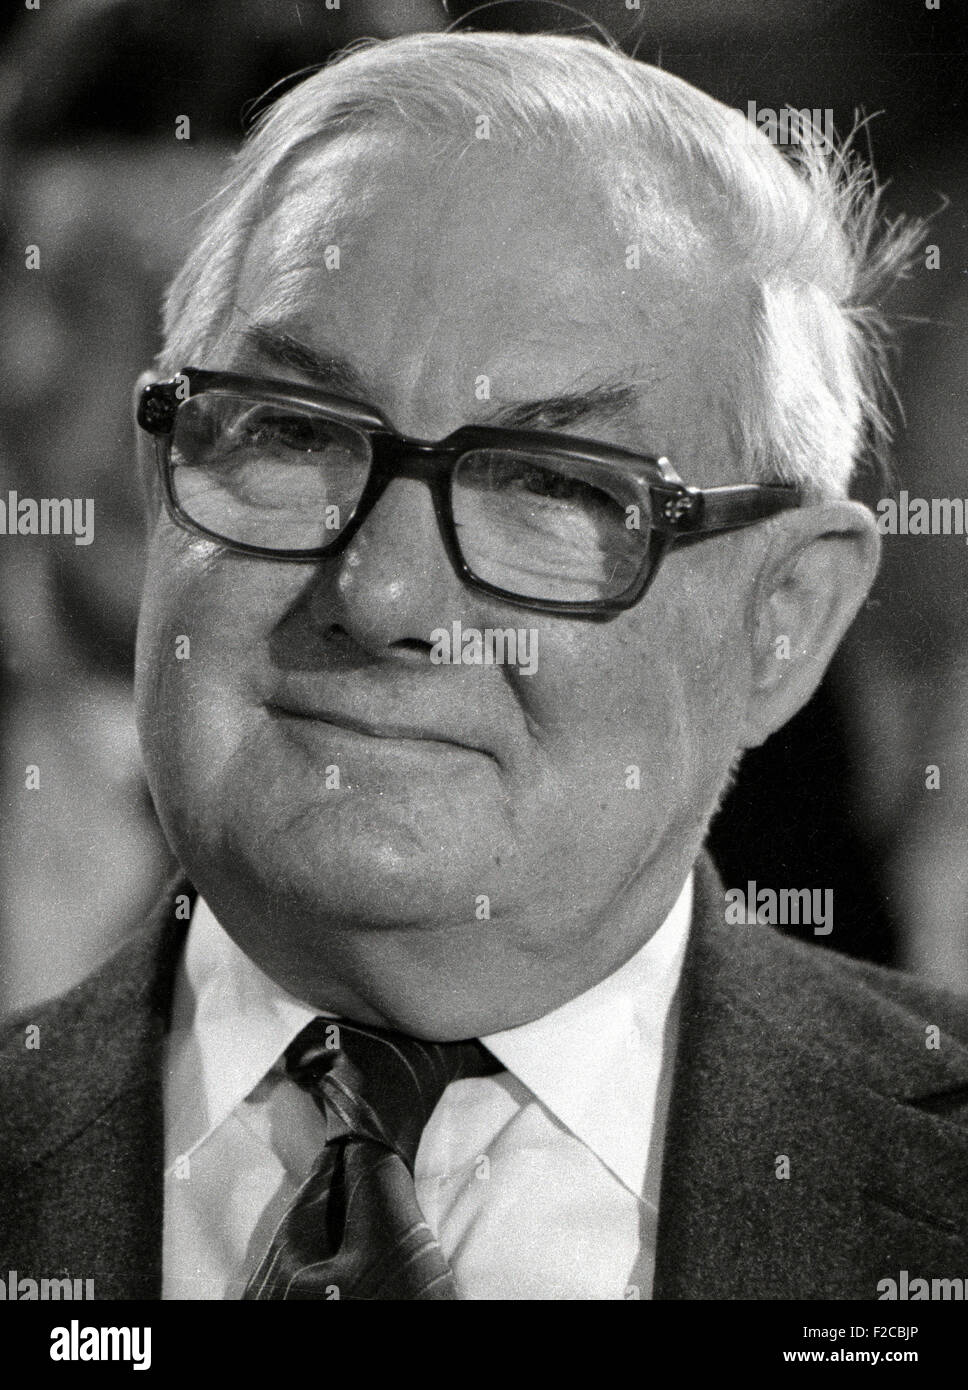 Jim Callaghan Leonard James Callaghan Lord Callaghan of Cardiff former Labour Prime Minister. 1984 image Stock Photo